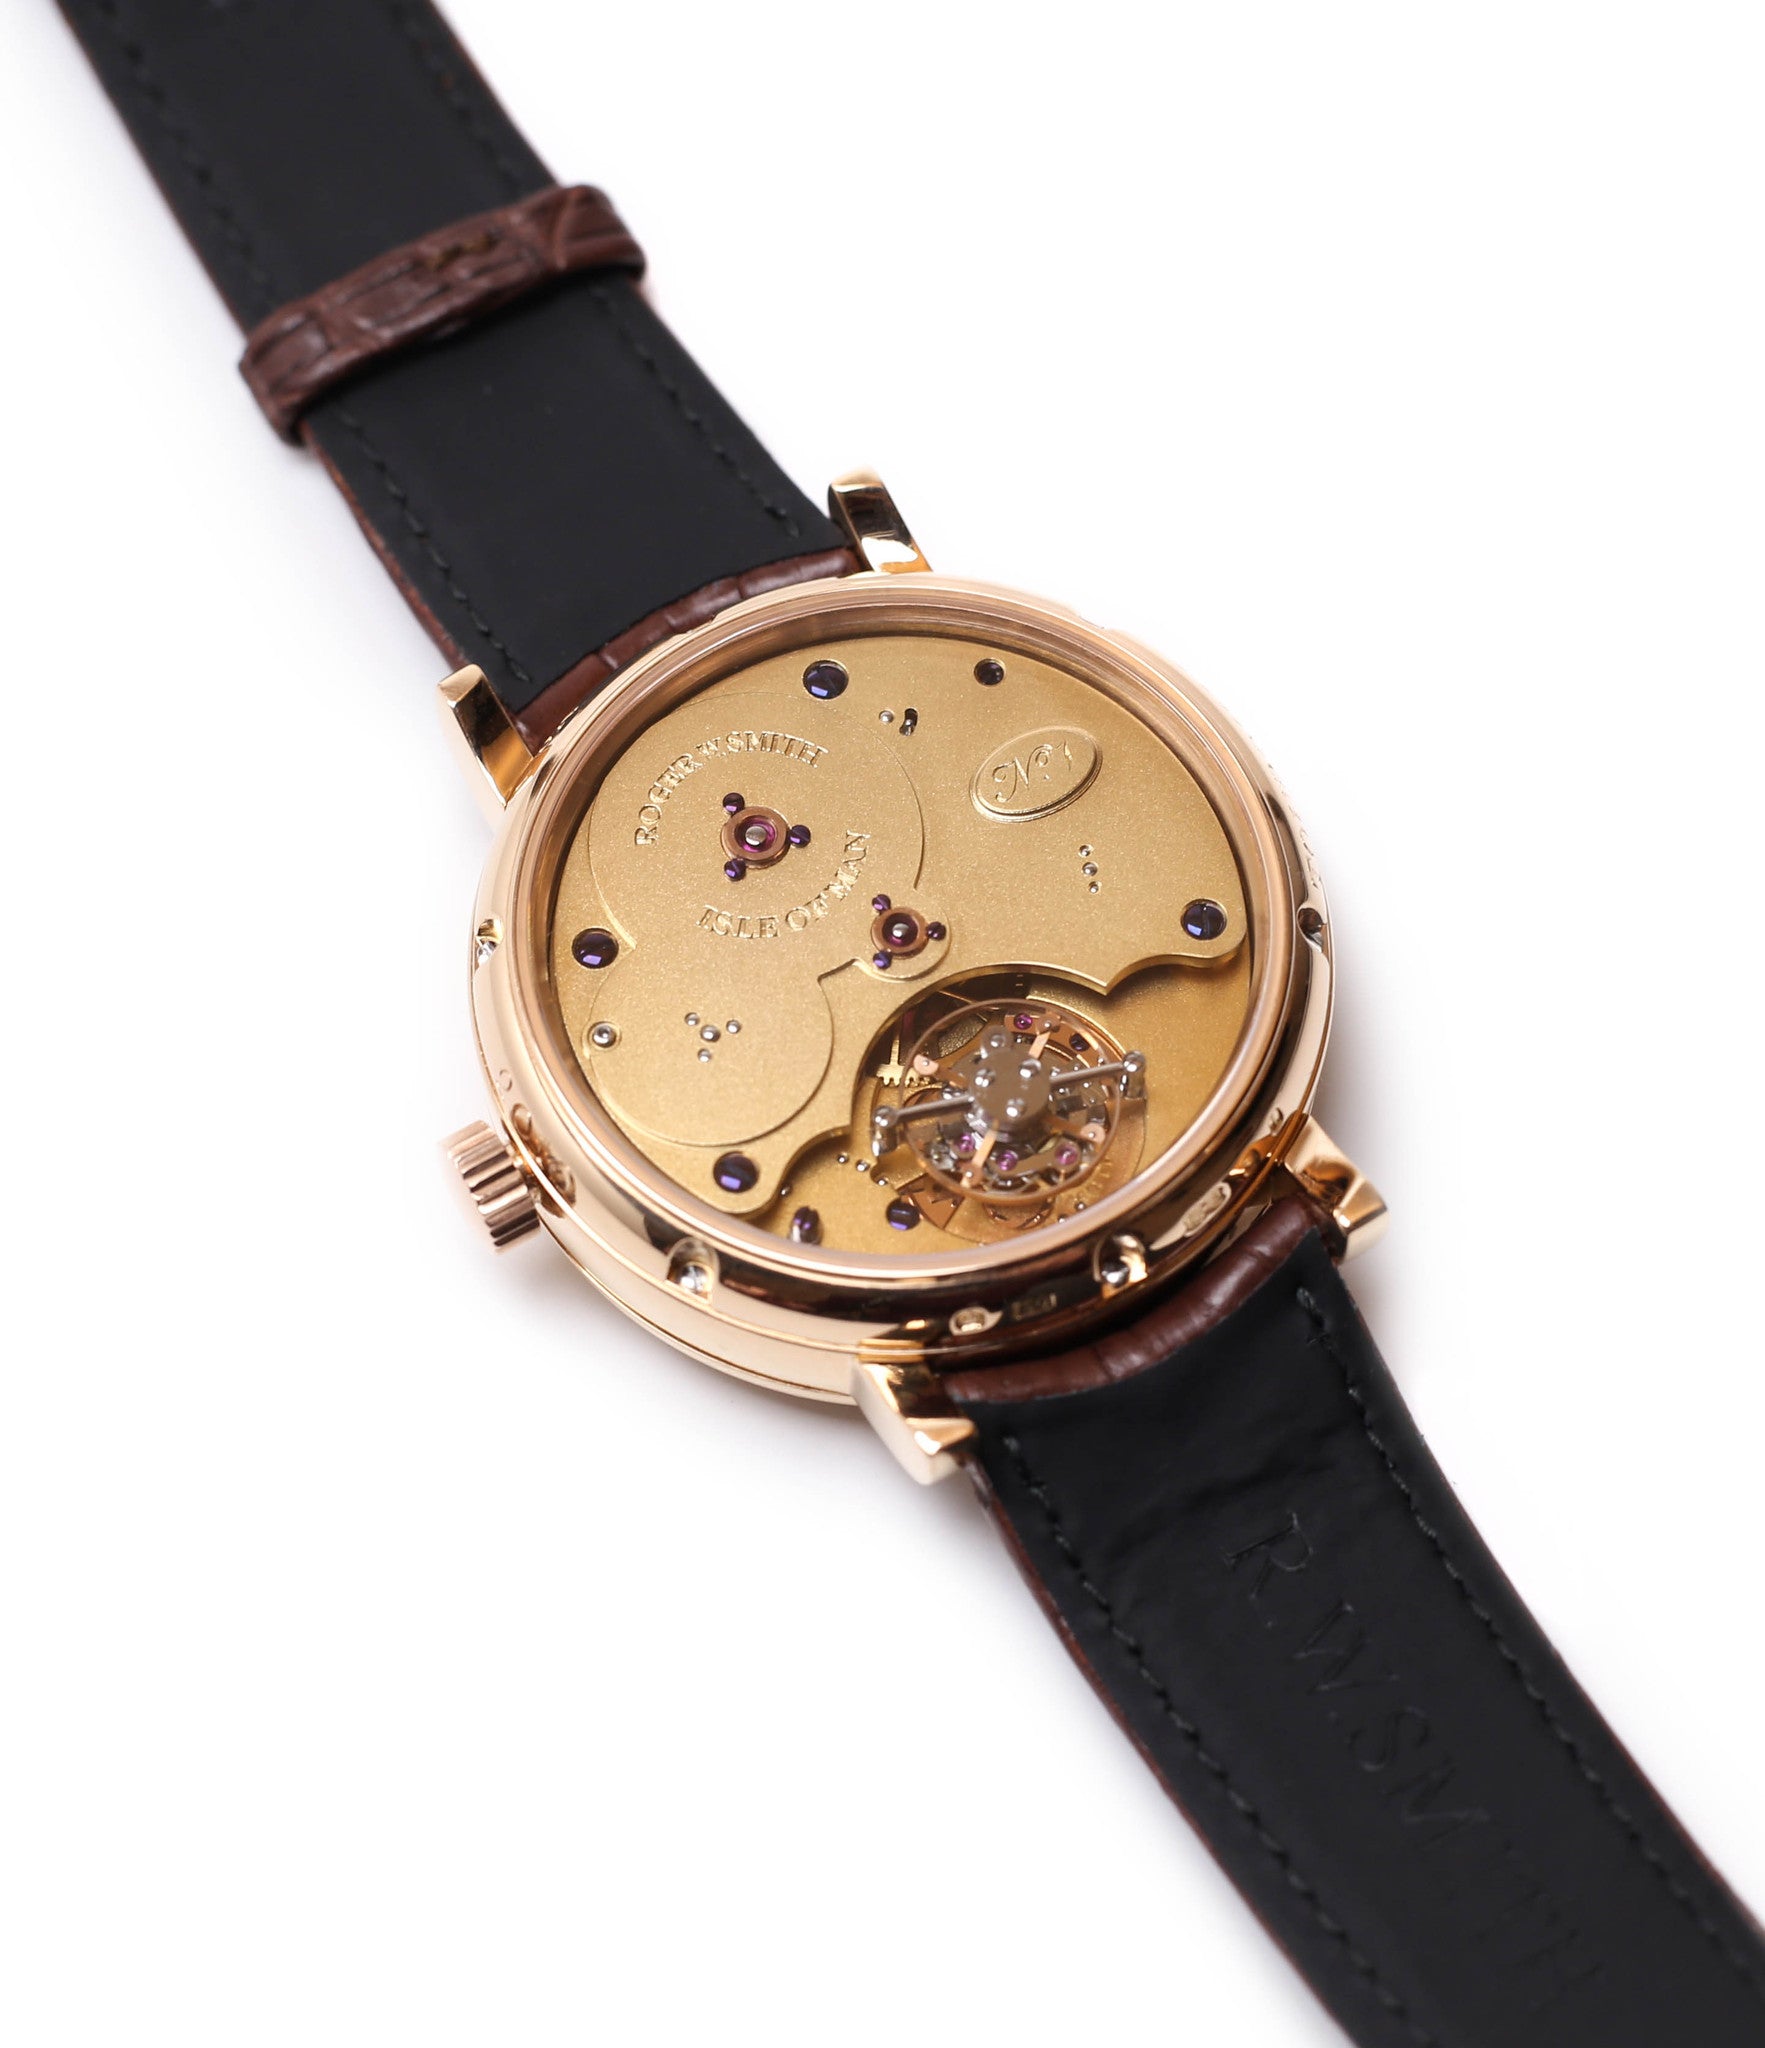 movement buy Roger Smith rare watch Grande Panorama date flying tourbillon No. 1 red gold dress watch at A Collected Man approved reseller of independent watchmakers